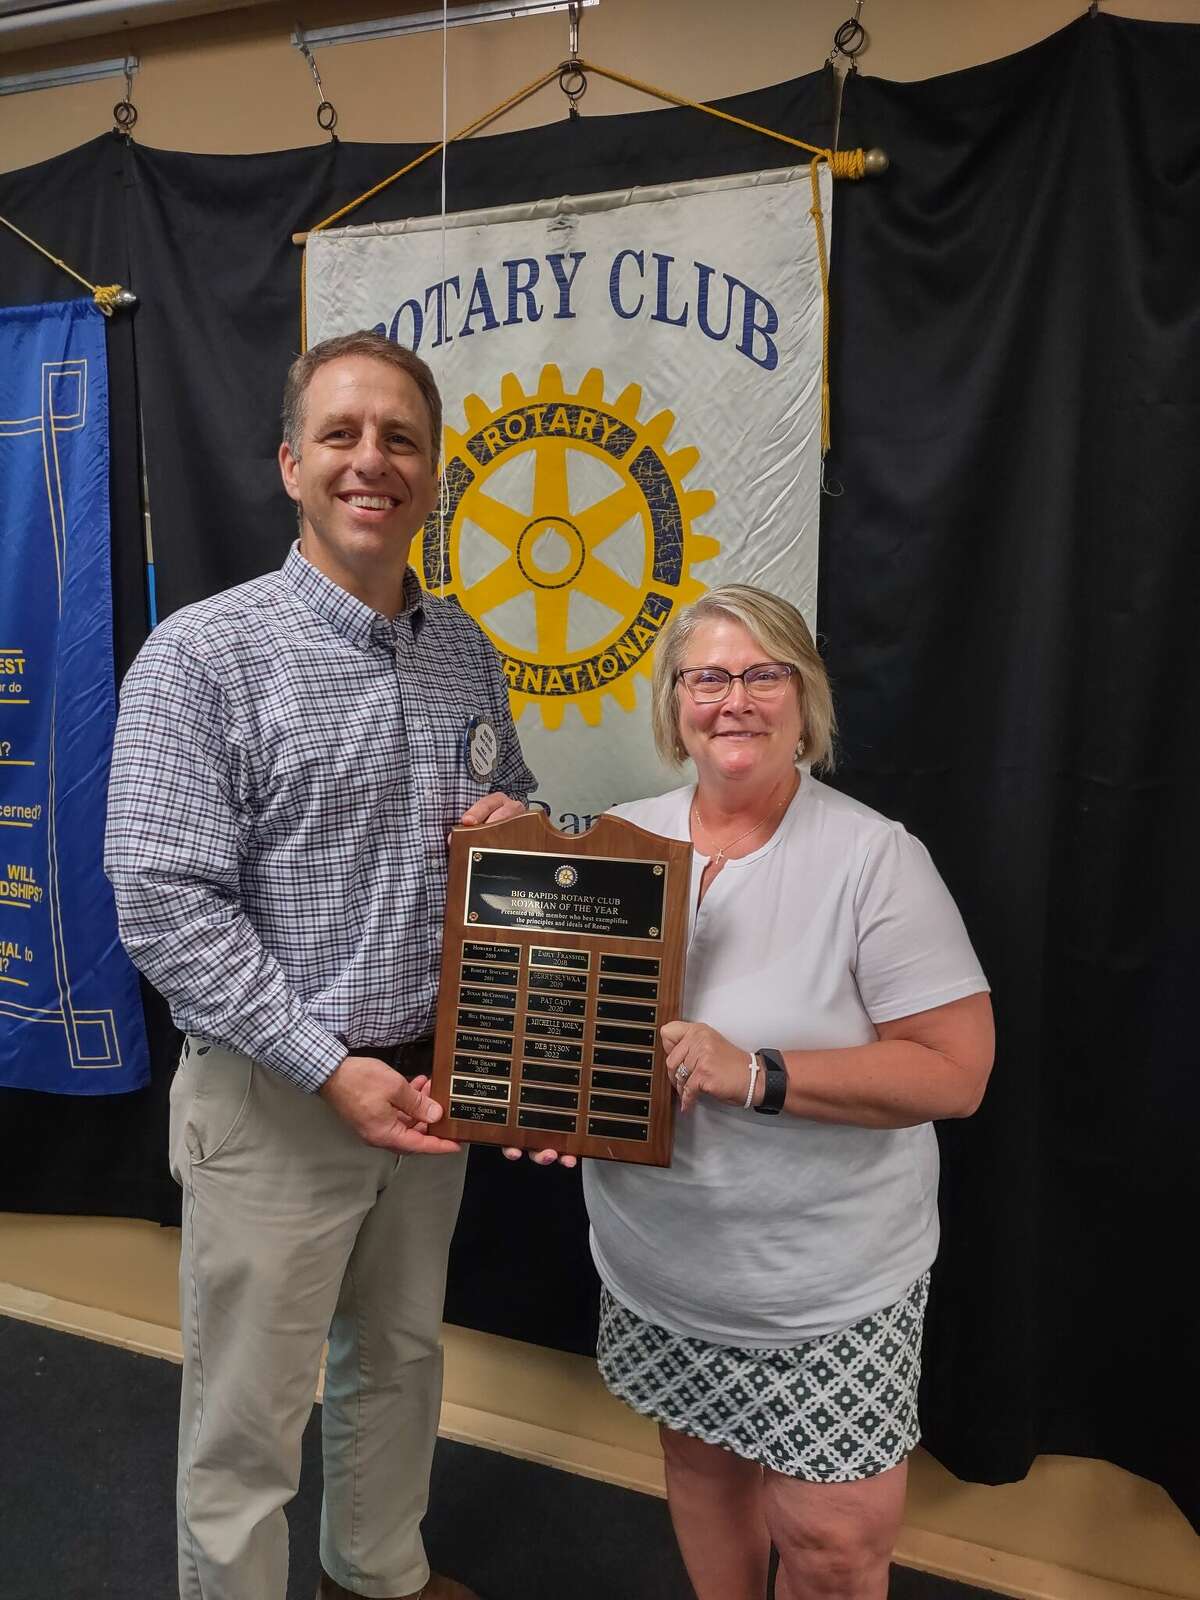 Long time Rotarian, and model club member Deb Tyson (pictured right) poses for a photo with club President Mark Gifford after she was voted by the club membership as Rotarian of the Year. Tyson’s tireless efforts in the service of her club made her an almost unanimous choice for this annual honor.  